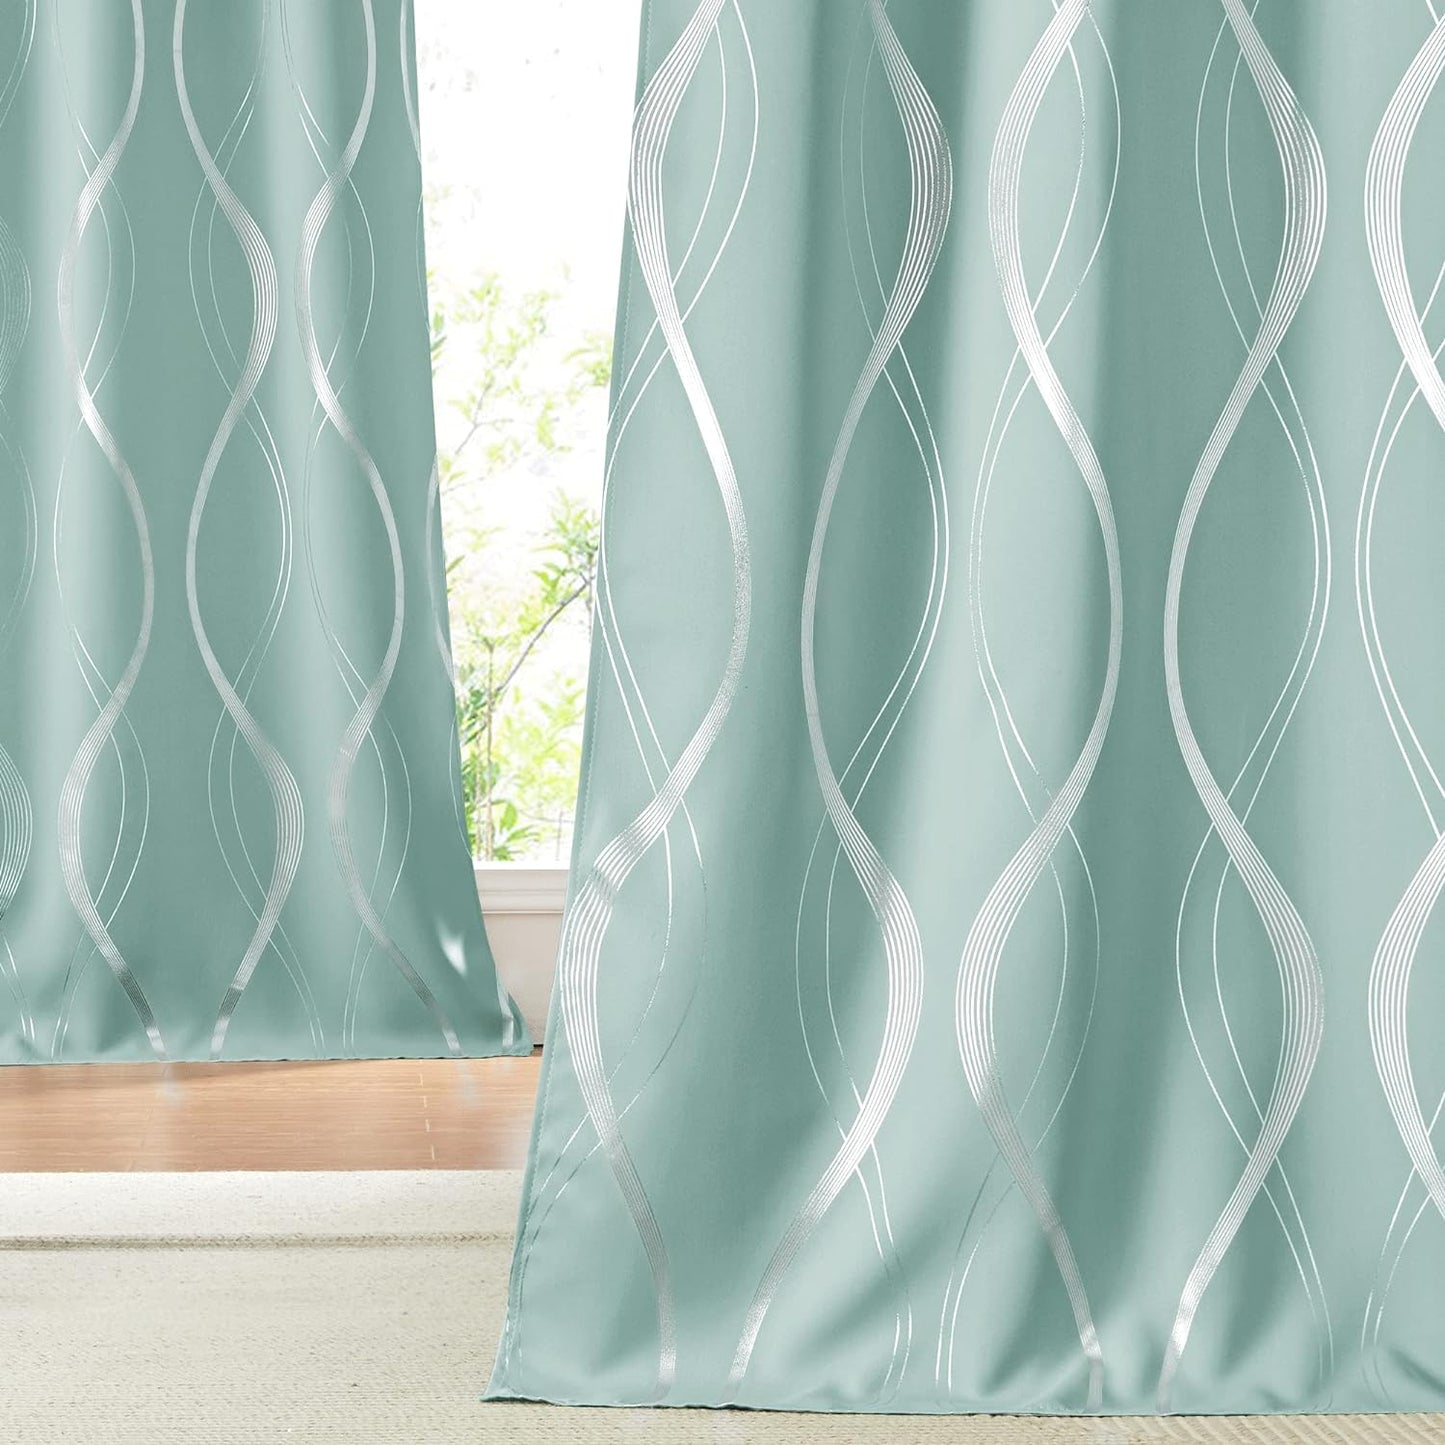 NICETOWN Grey Blackout Curtains 84 Inch Length 2 Panels Set for Bedroom/Living Room, Noise Reducing Thermal Insulated Wave Line Foil Print Drapes for Patio Sliding Glass Door (52 X 84, Gray)  NICETOWN Auqa Blue 52"W X 84"L 